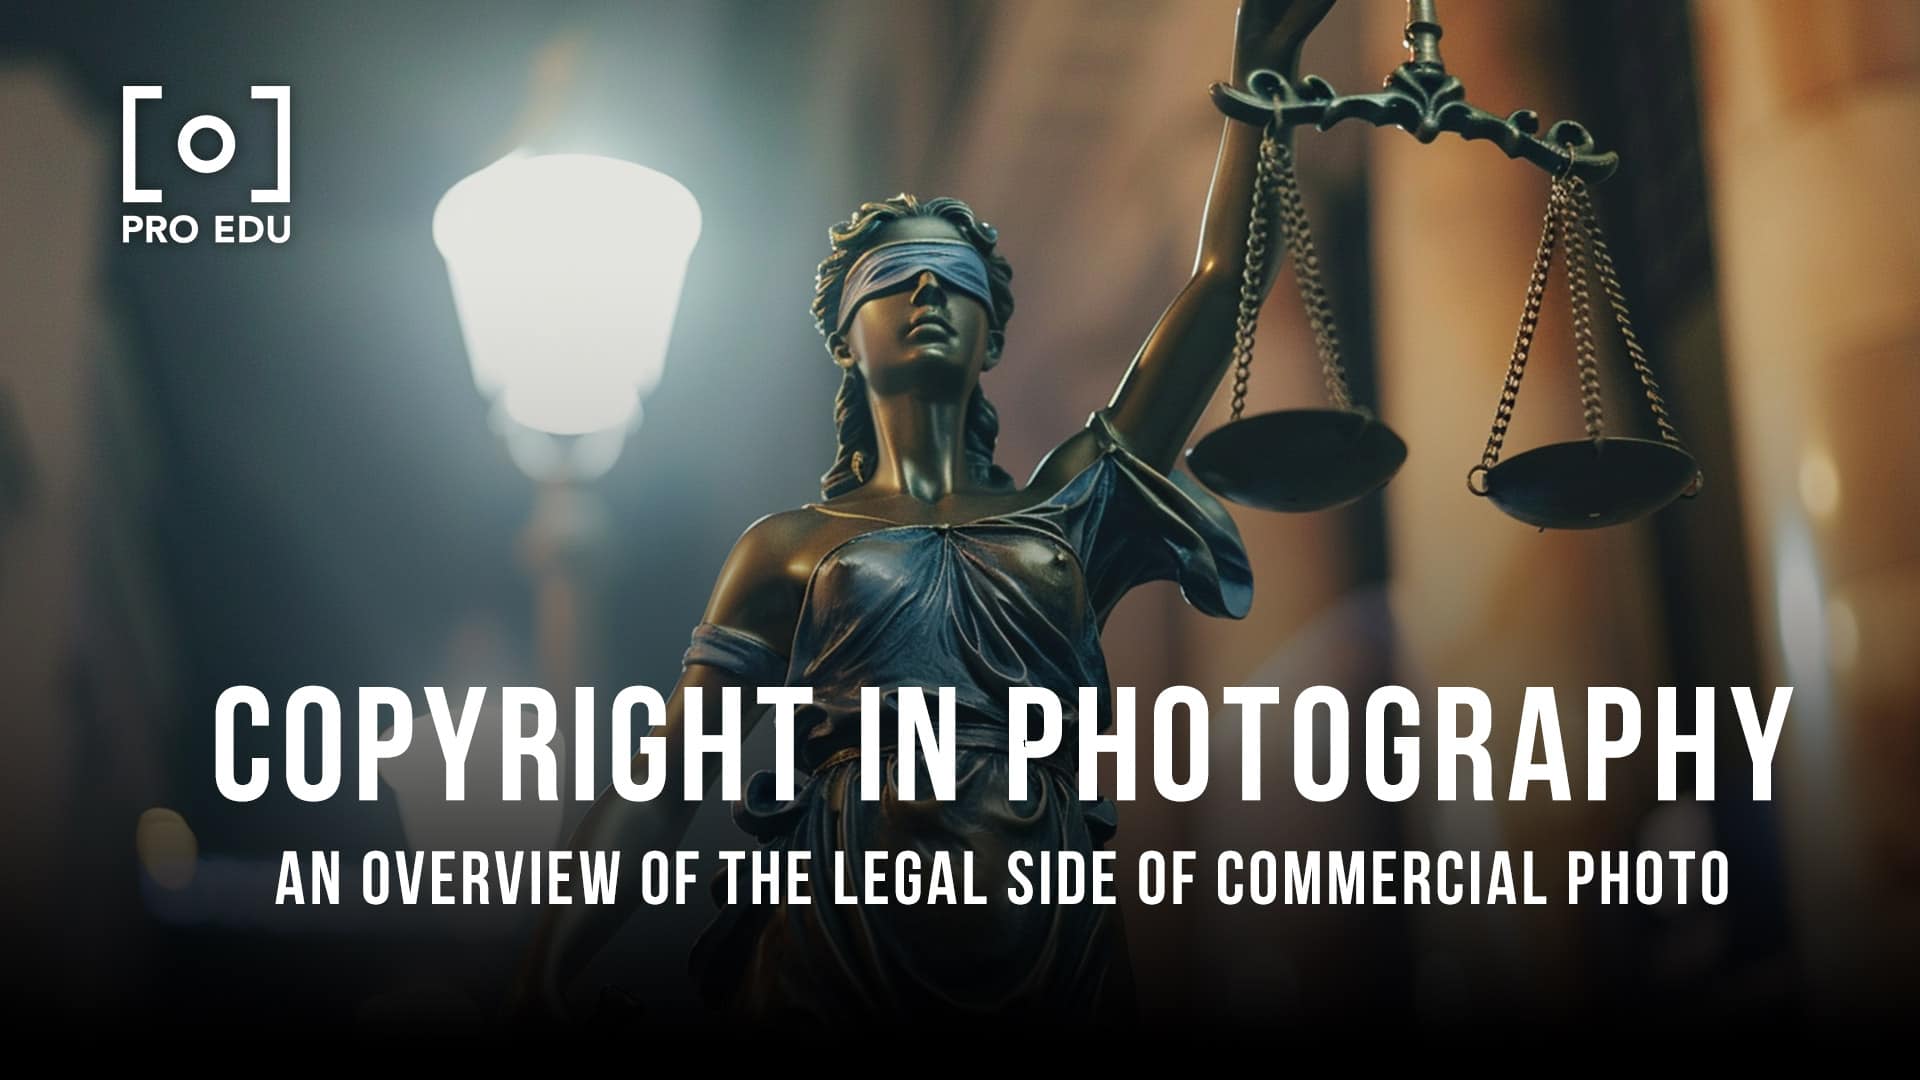 Gavel and camera implying legal side of photography